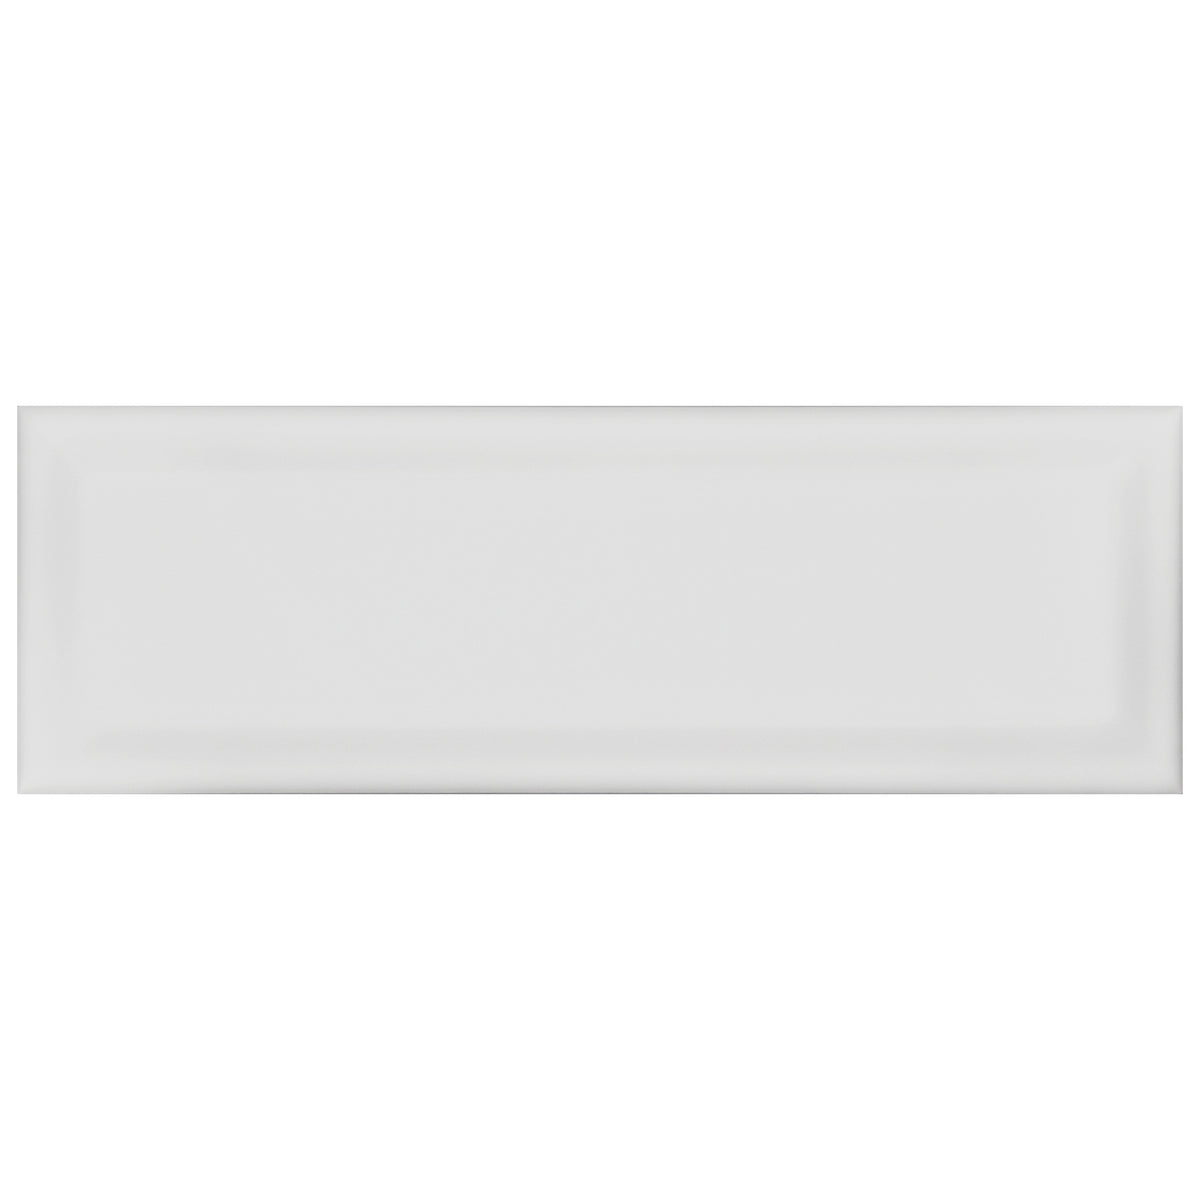 Anatolia - Soho Collection 4 in. x 12 in. Beveled Wall Tile - Gallery Grey Glossy